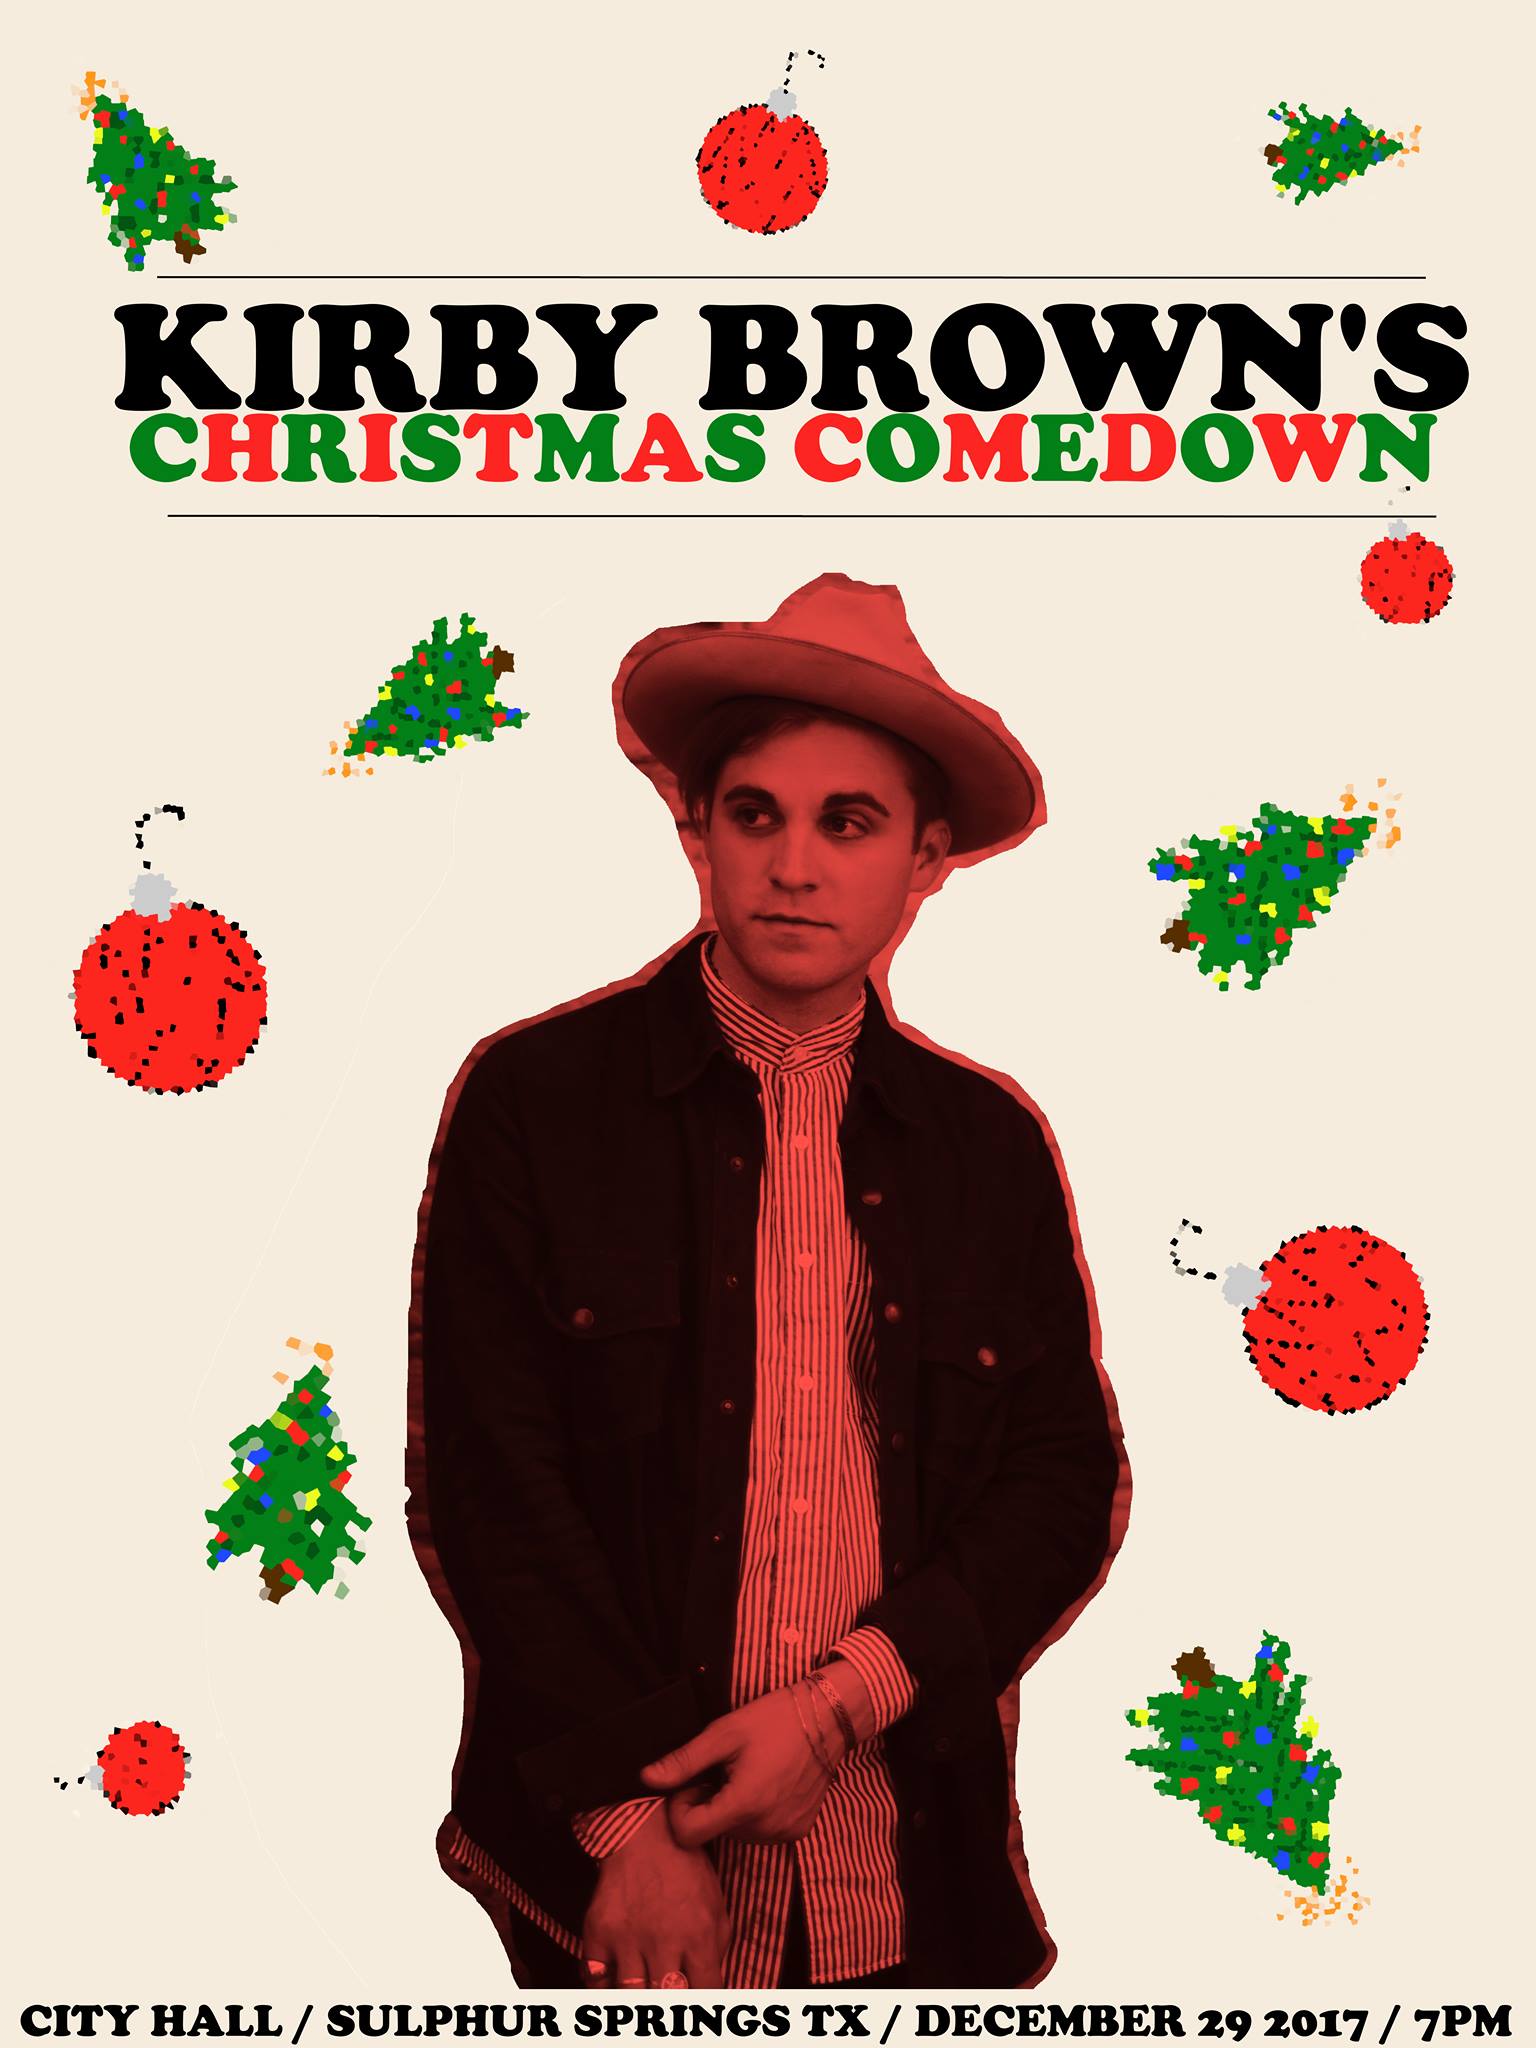 Kirby Brown’s Christmas Comedown Concert at SS City Hall Friday Night